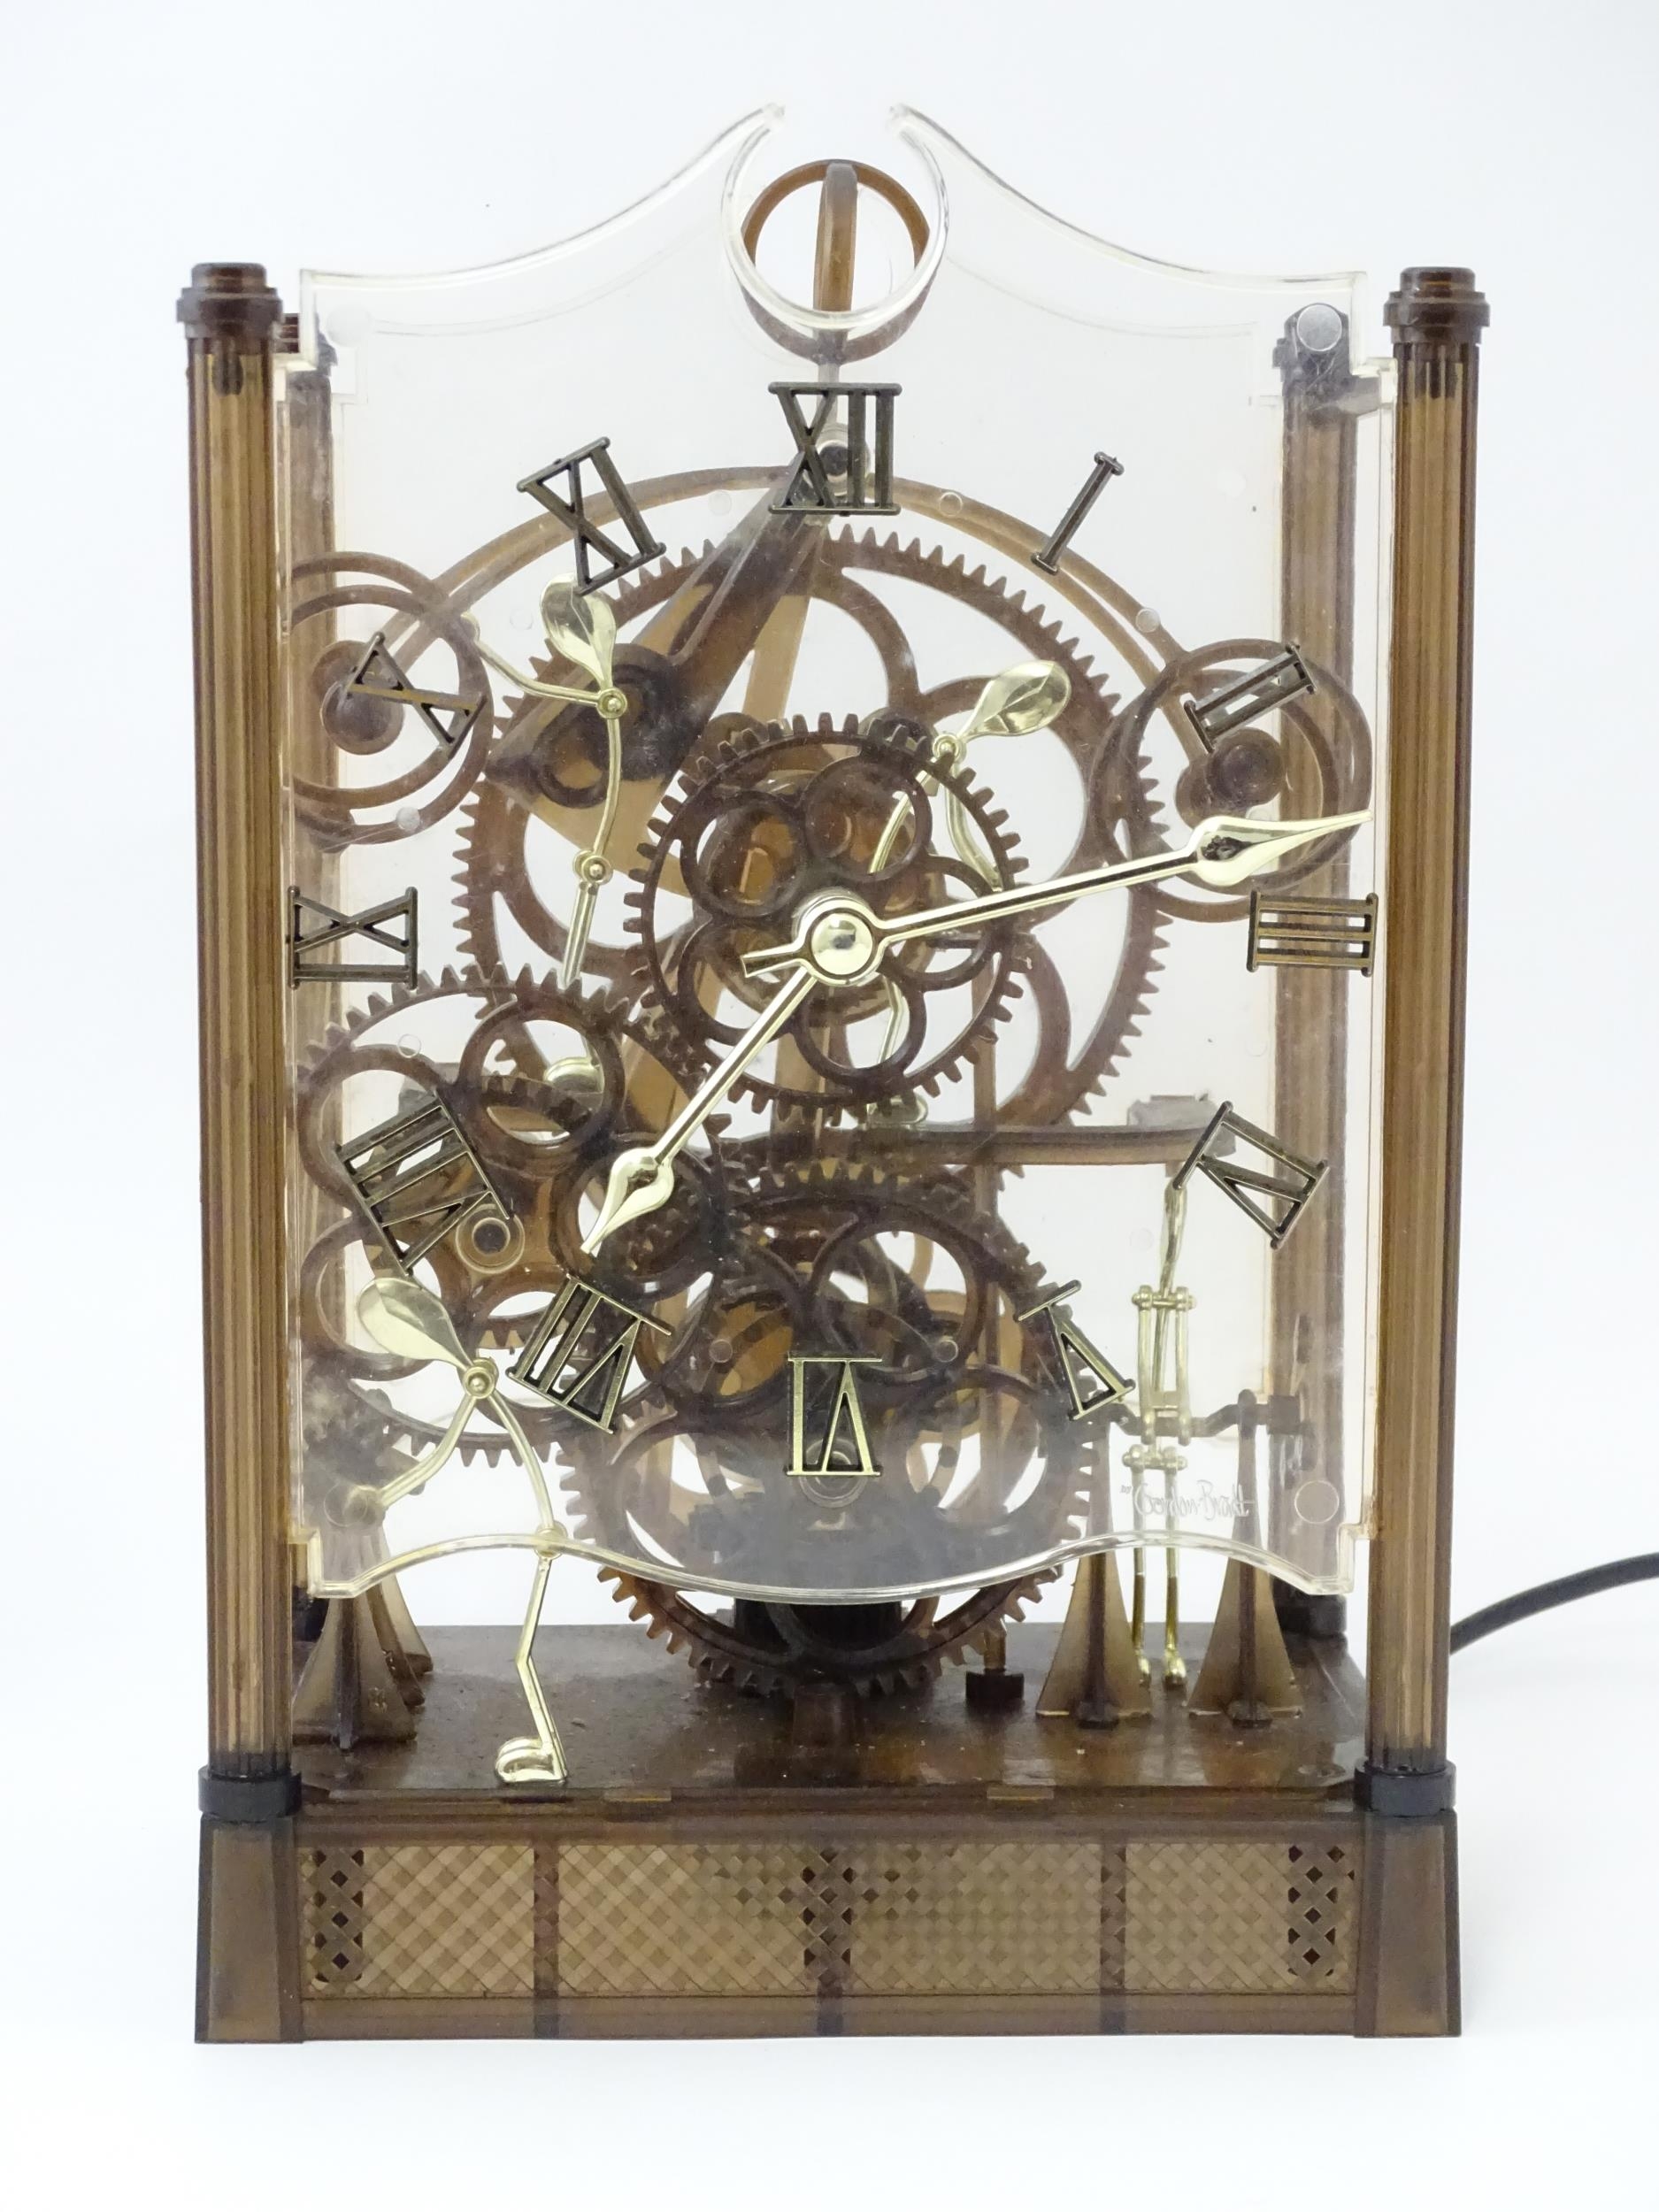 An Arrow Industries ' Electric Master Motion Clock' known as the Animated Time Machine' of plastic - Image 5 of 12